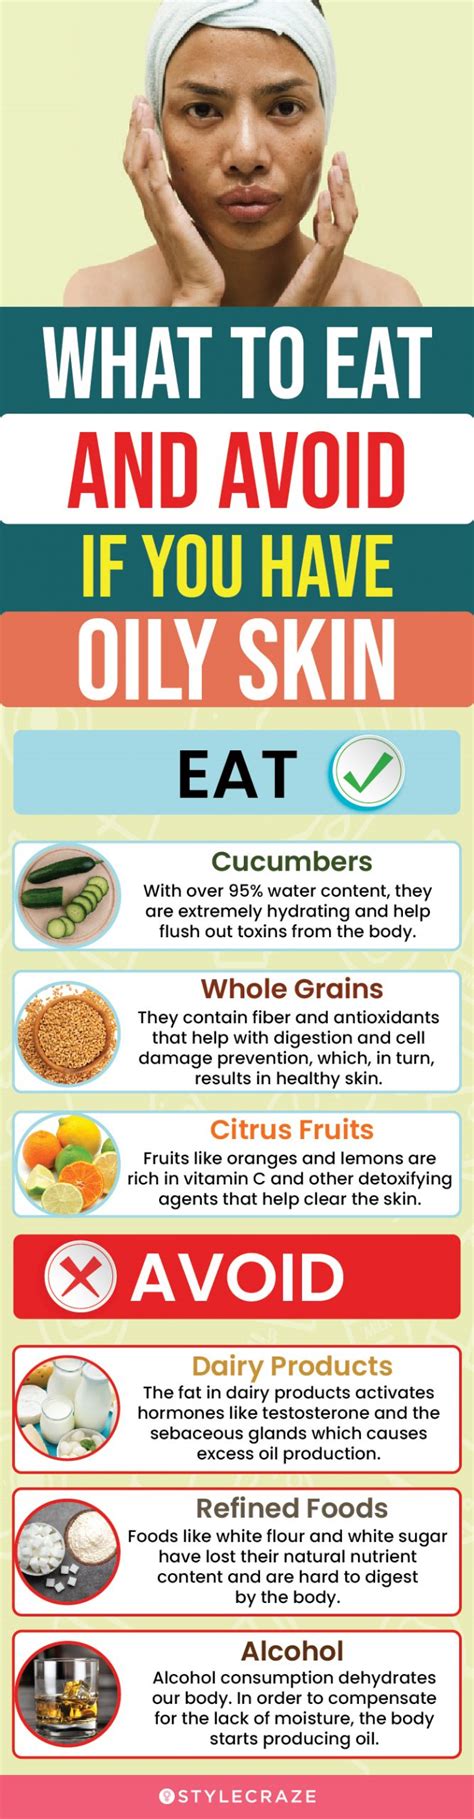 Foods For Oily Skin What To Eat And Avoid For Healthier Skin